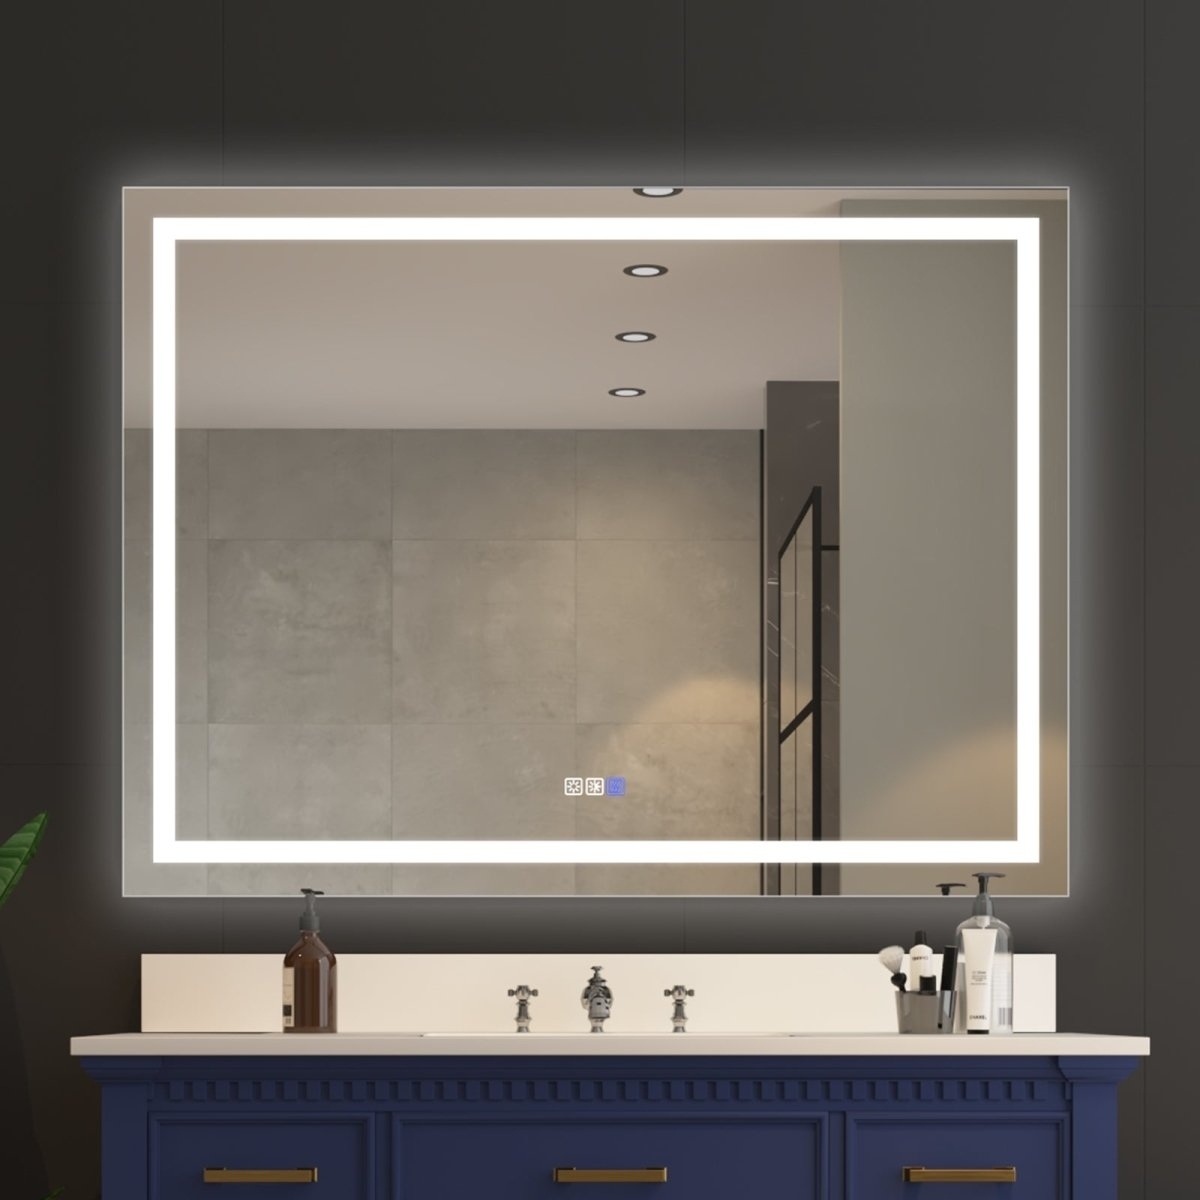 ExBrite 36 x 48 inch Bathroom Led Light Mirror Dimmable Front or Back Lighting Mirror - Front Light